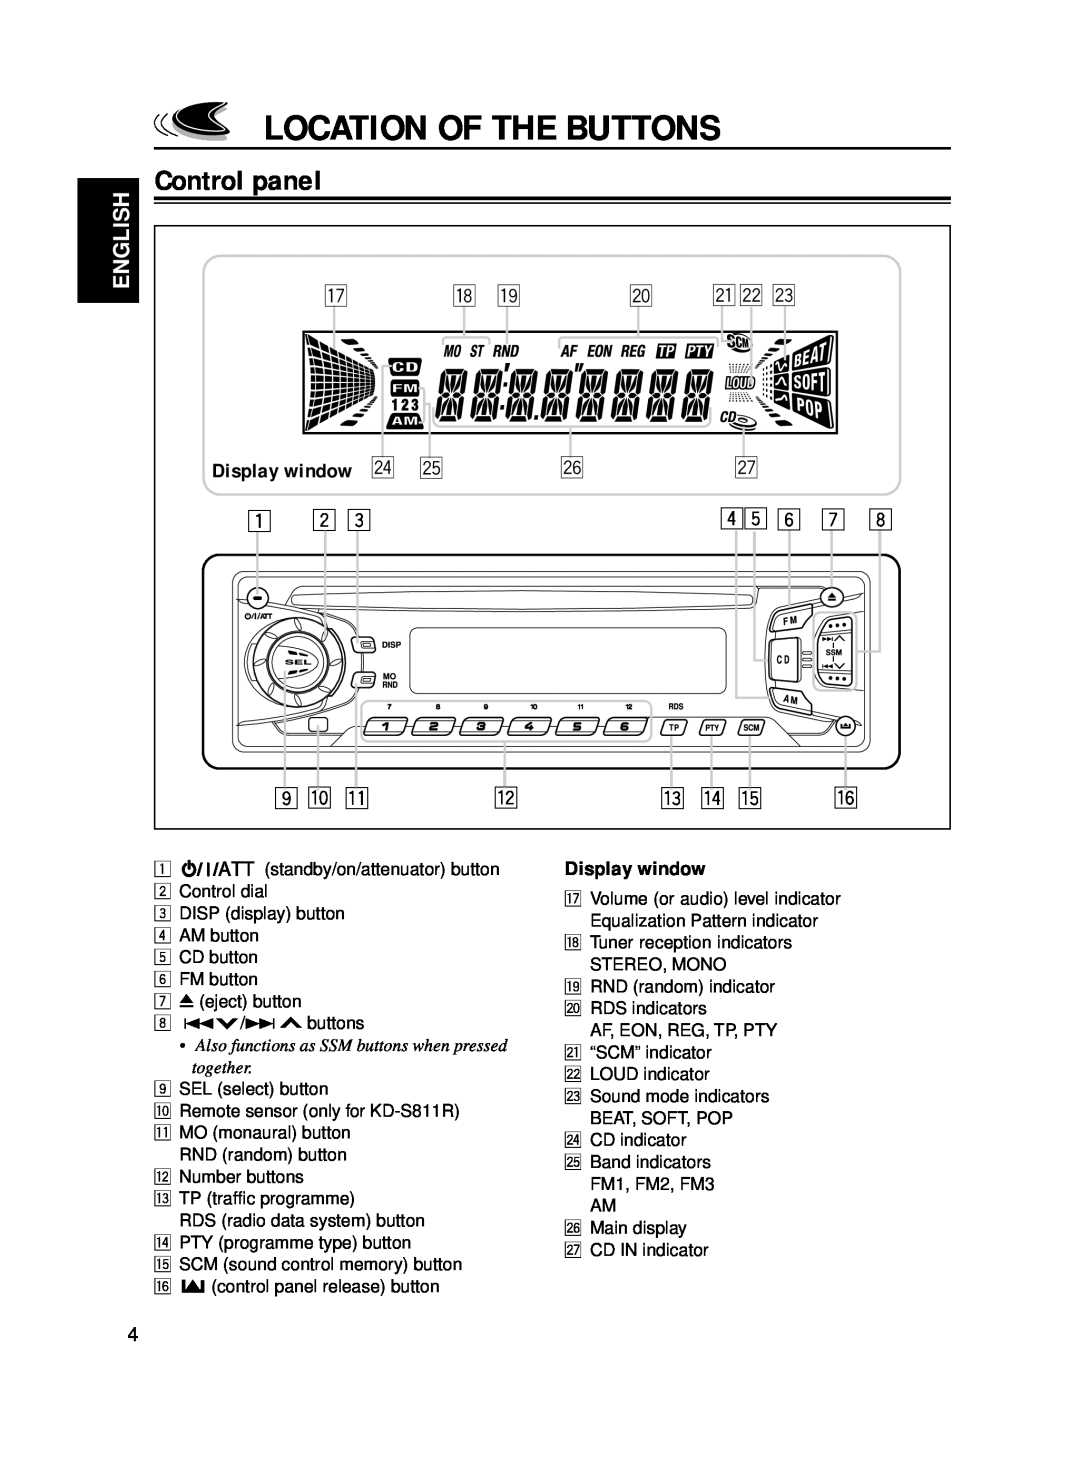 JVC KD-S811R manual Location Of The Buttons, Control panel 